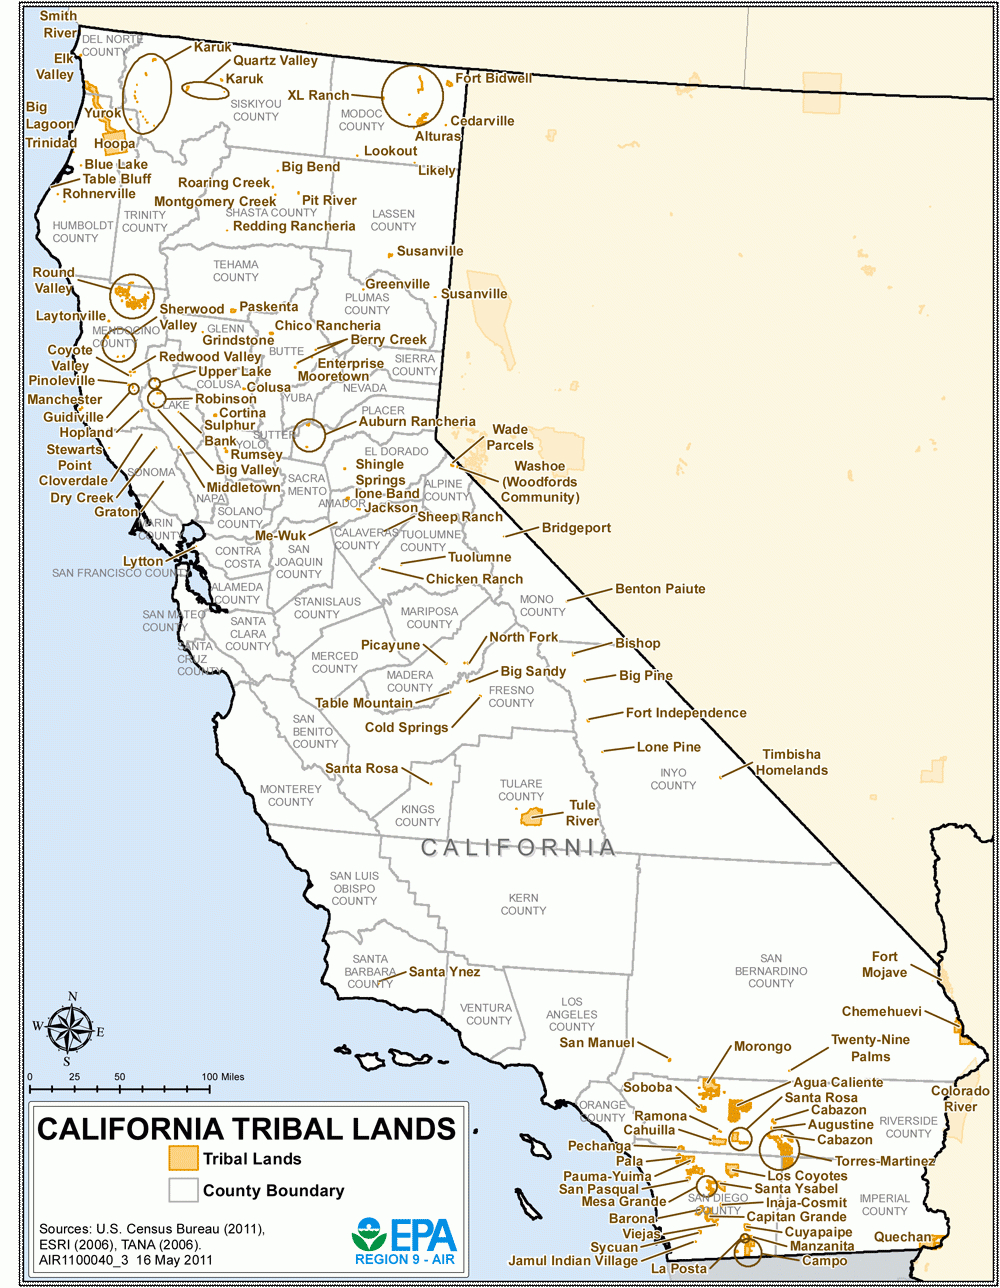 California Tribal Lands, Maps, Air Quality Analysis | Pacific - California Indian Map